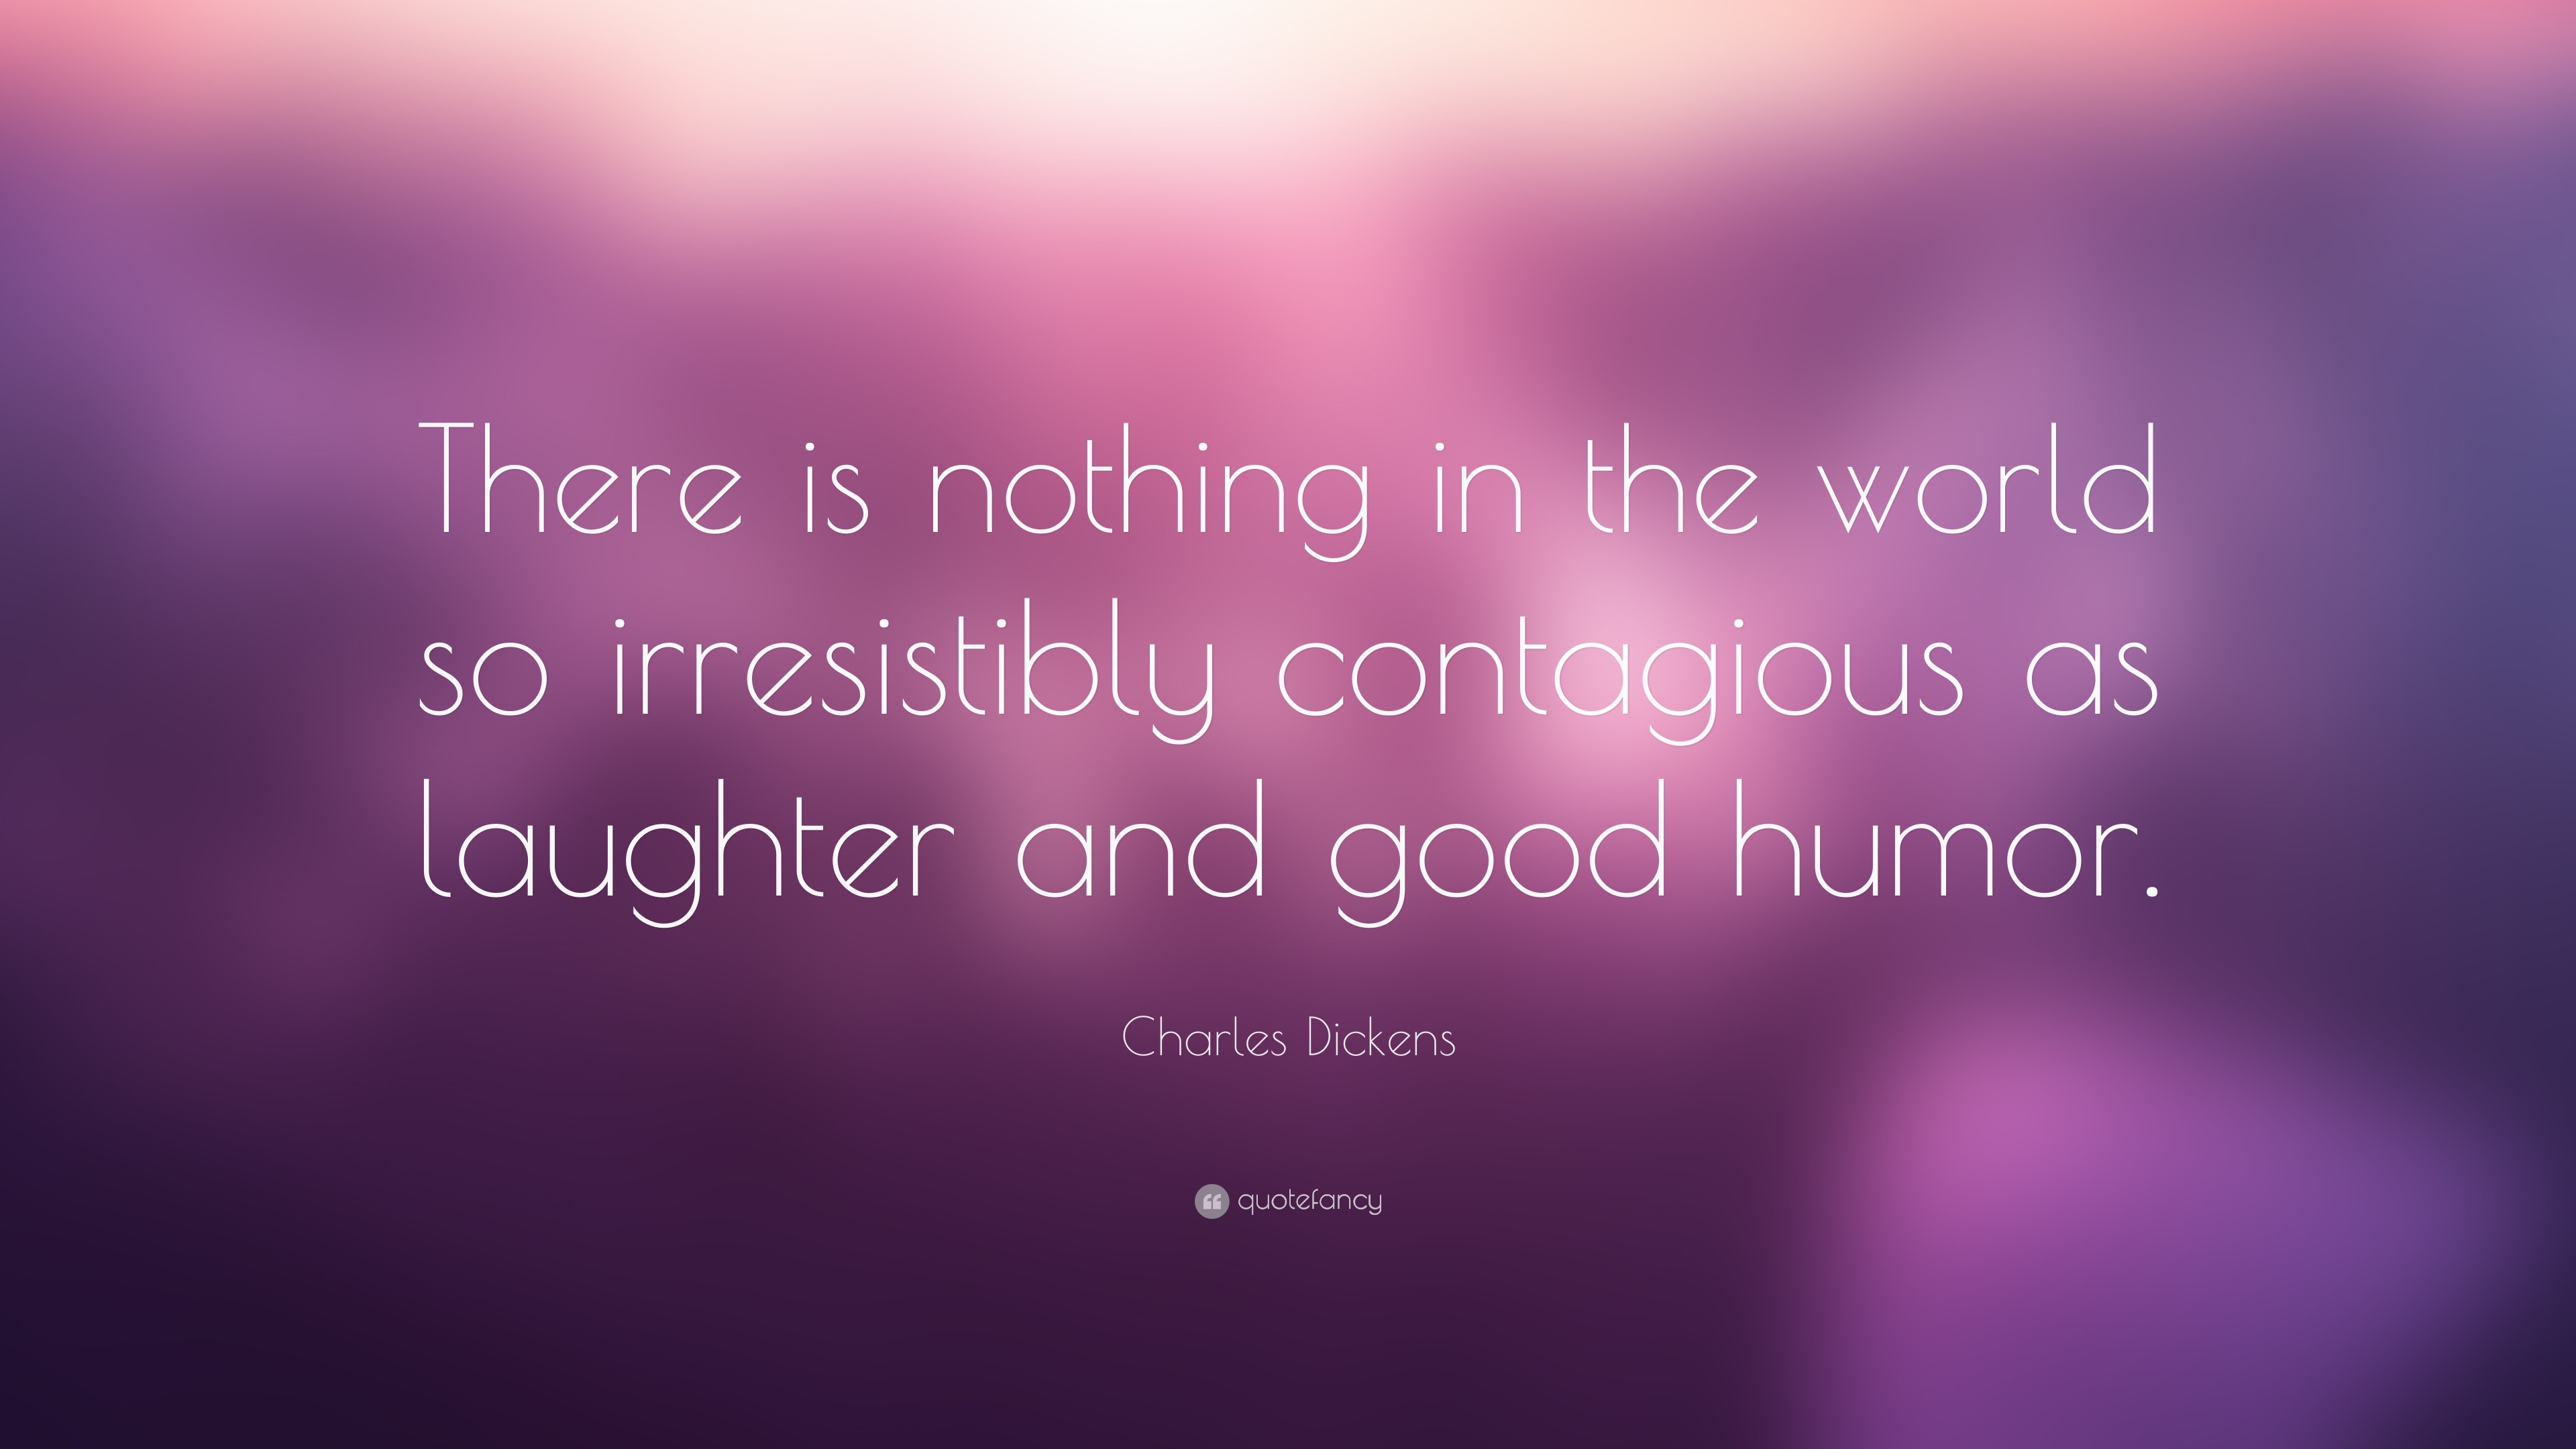 Charles Dickens Quote: “There is nothing in the world so irresistibly